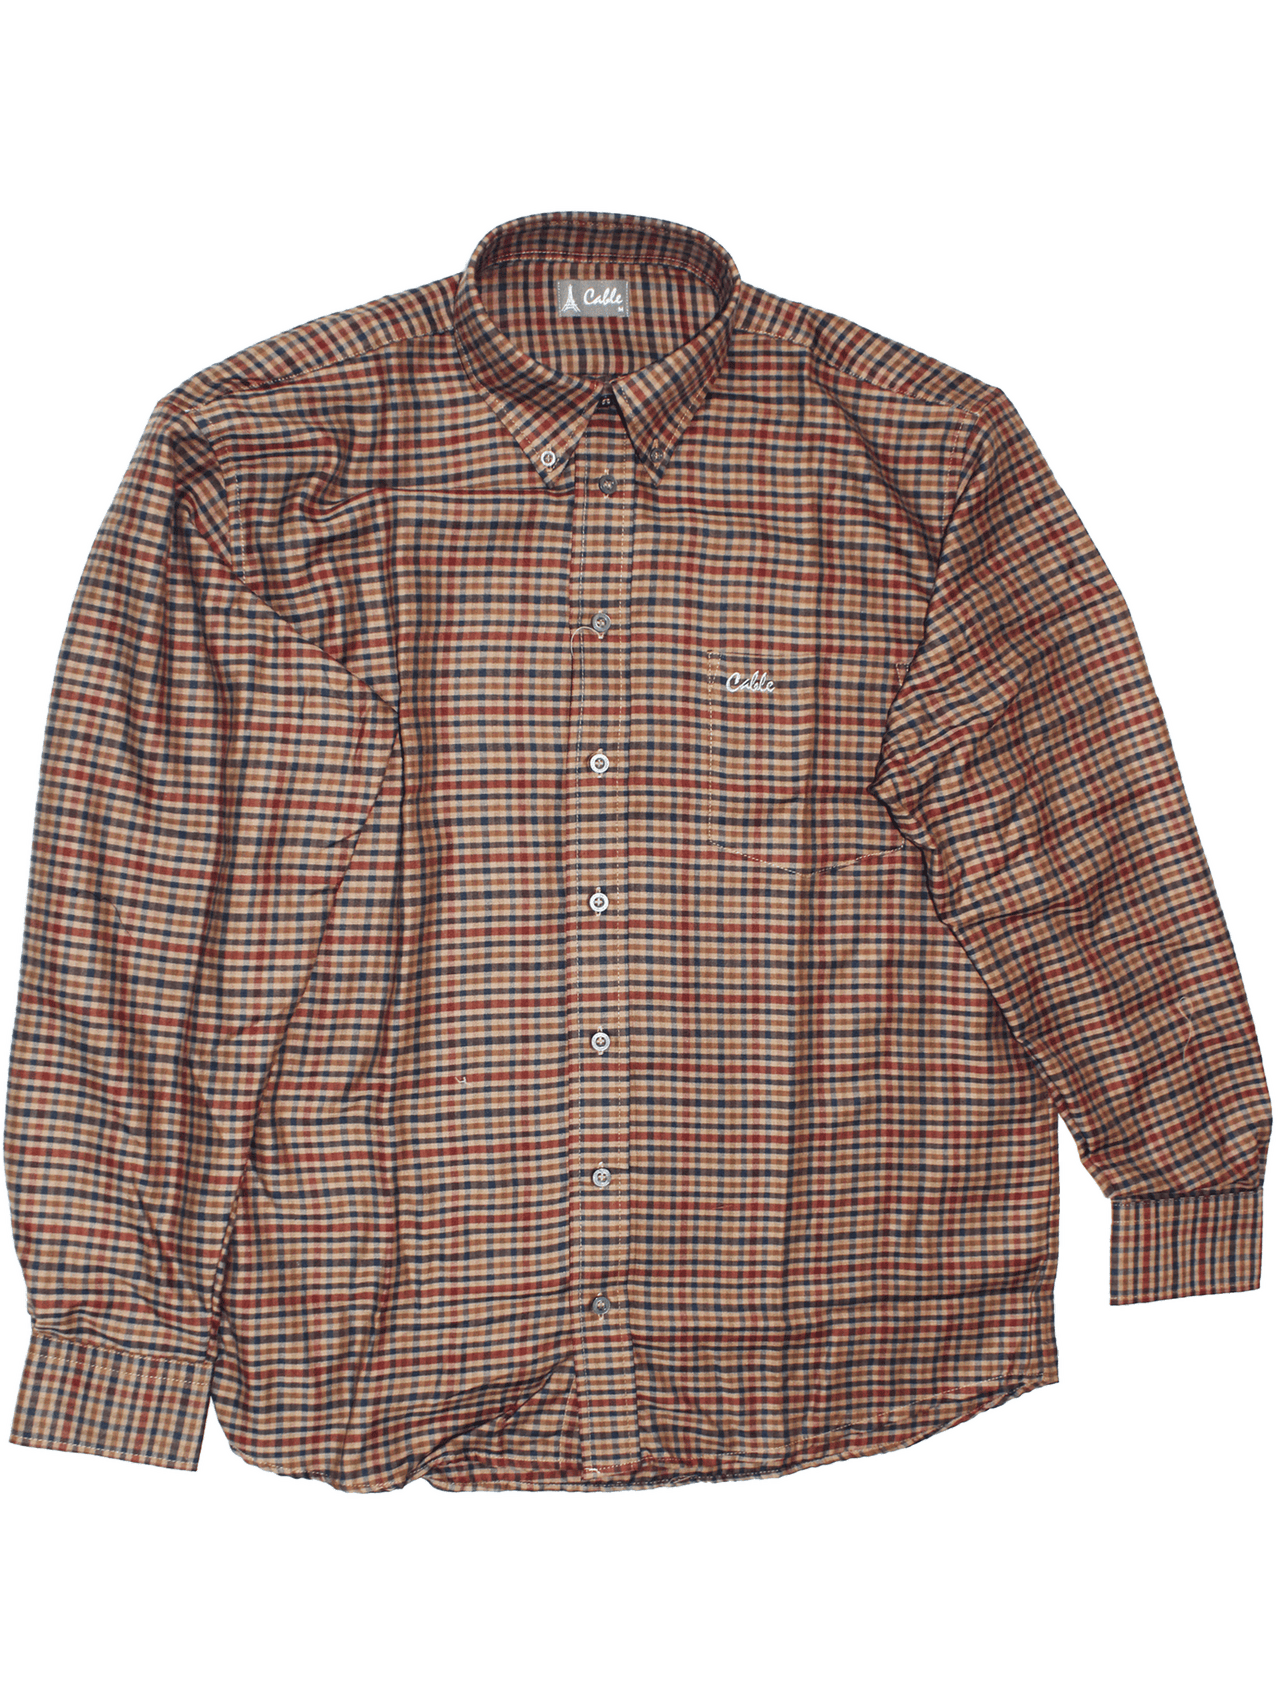 CABLE Brown Checkered L/S Shirt